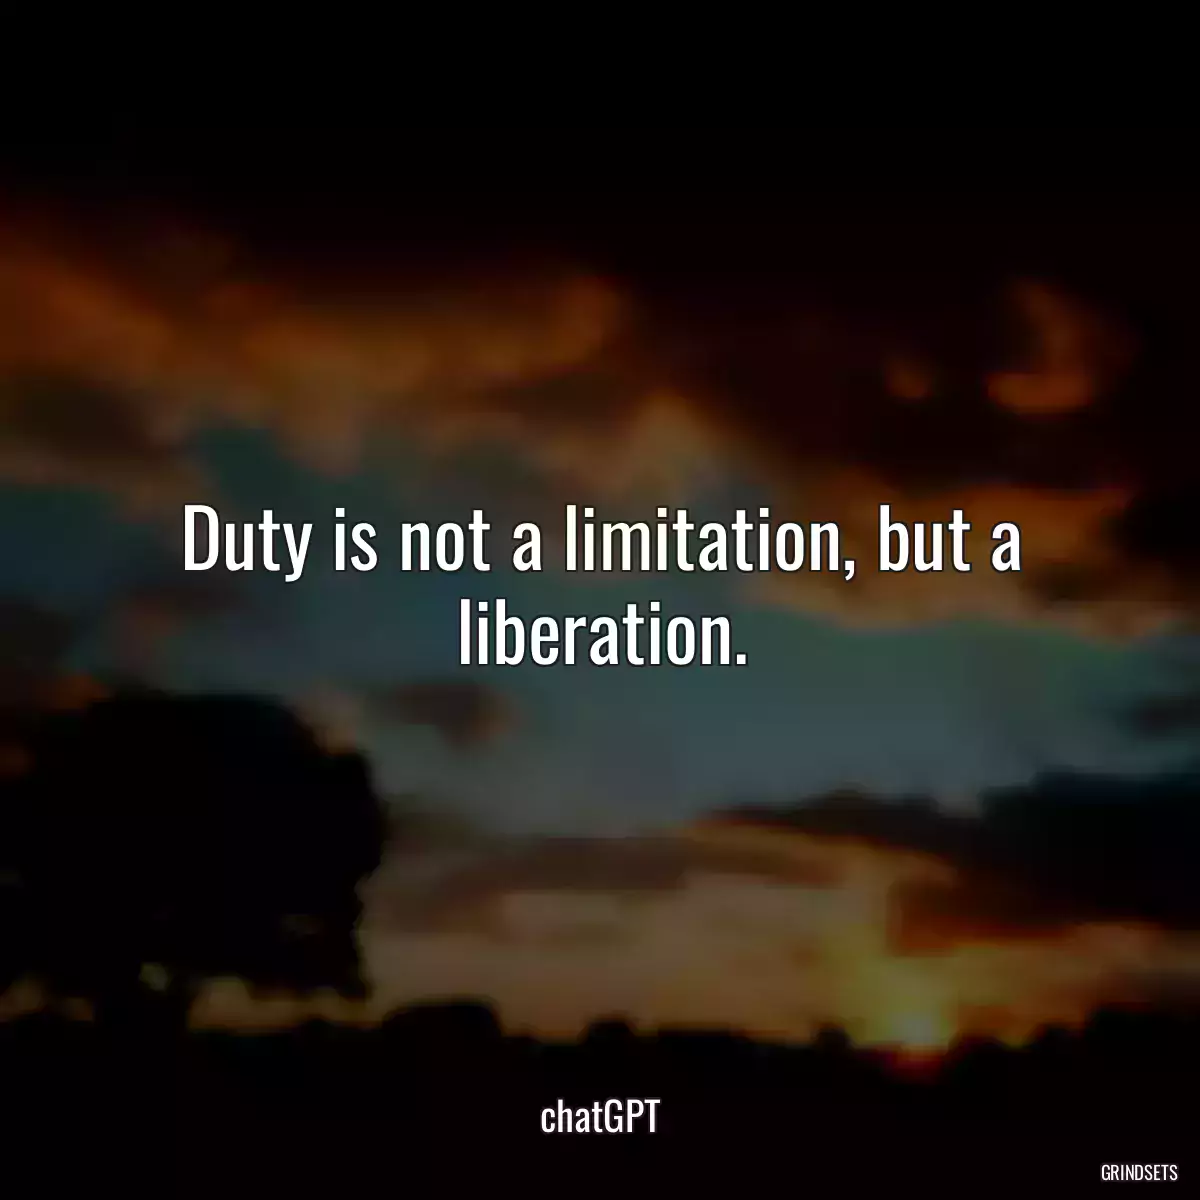 Duty is not a limitation, but a liberation.